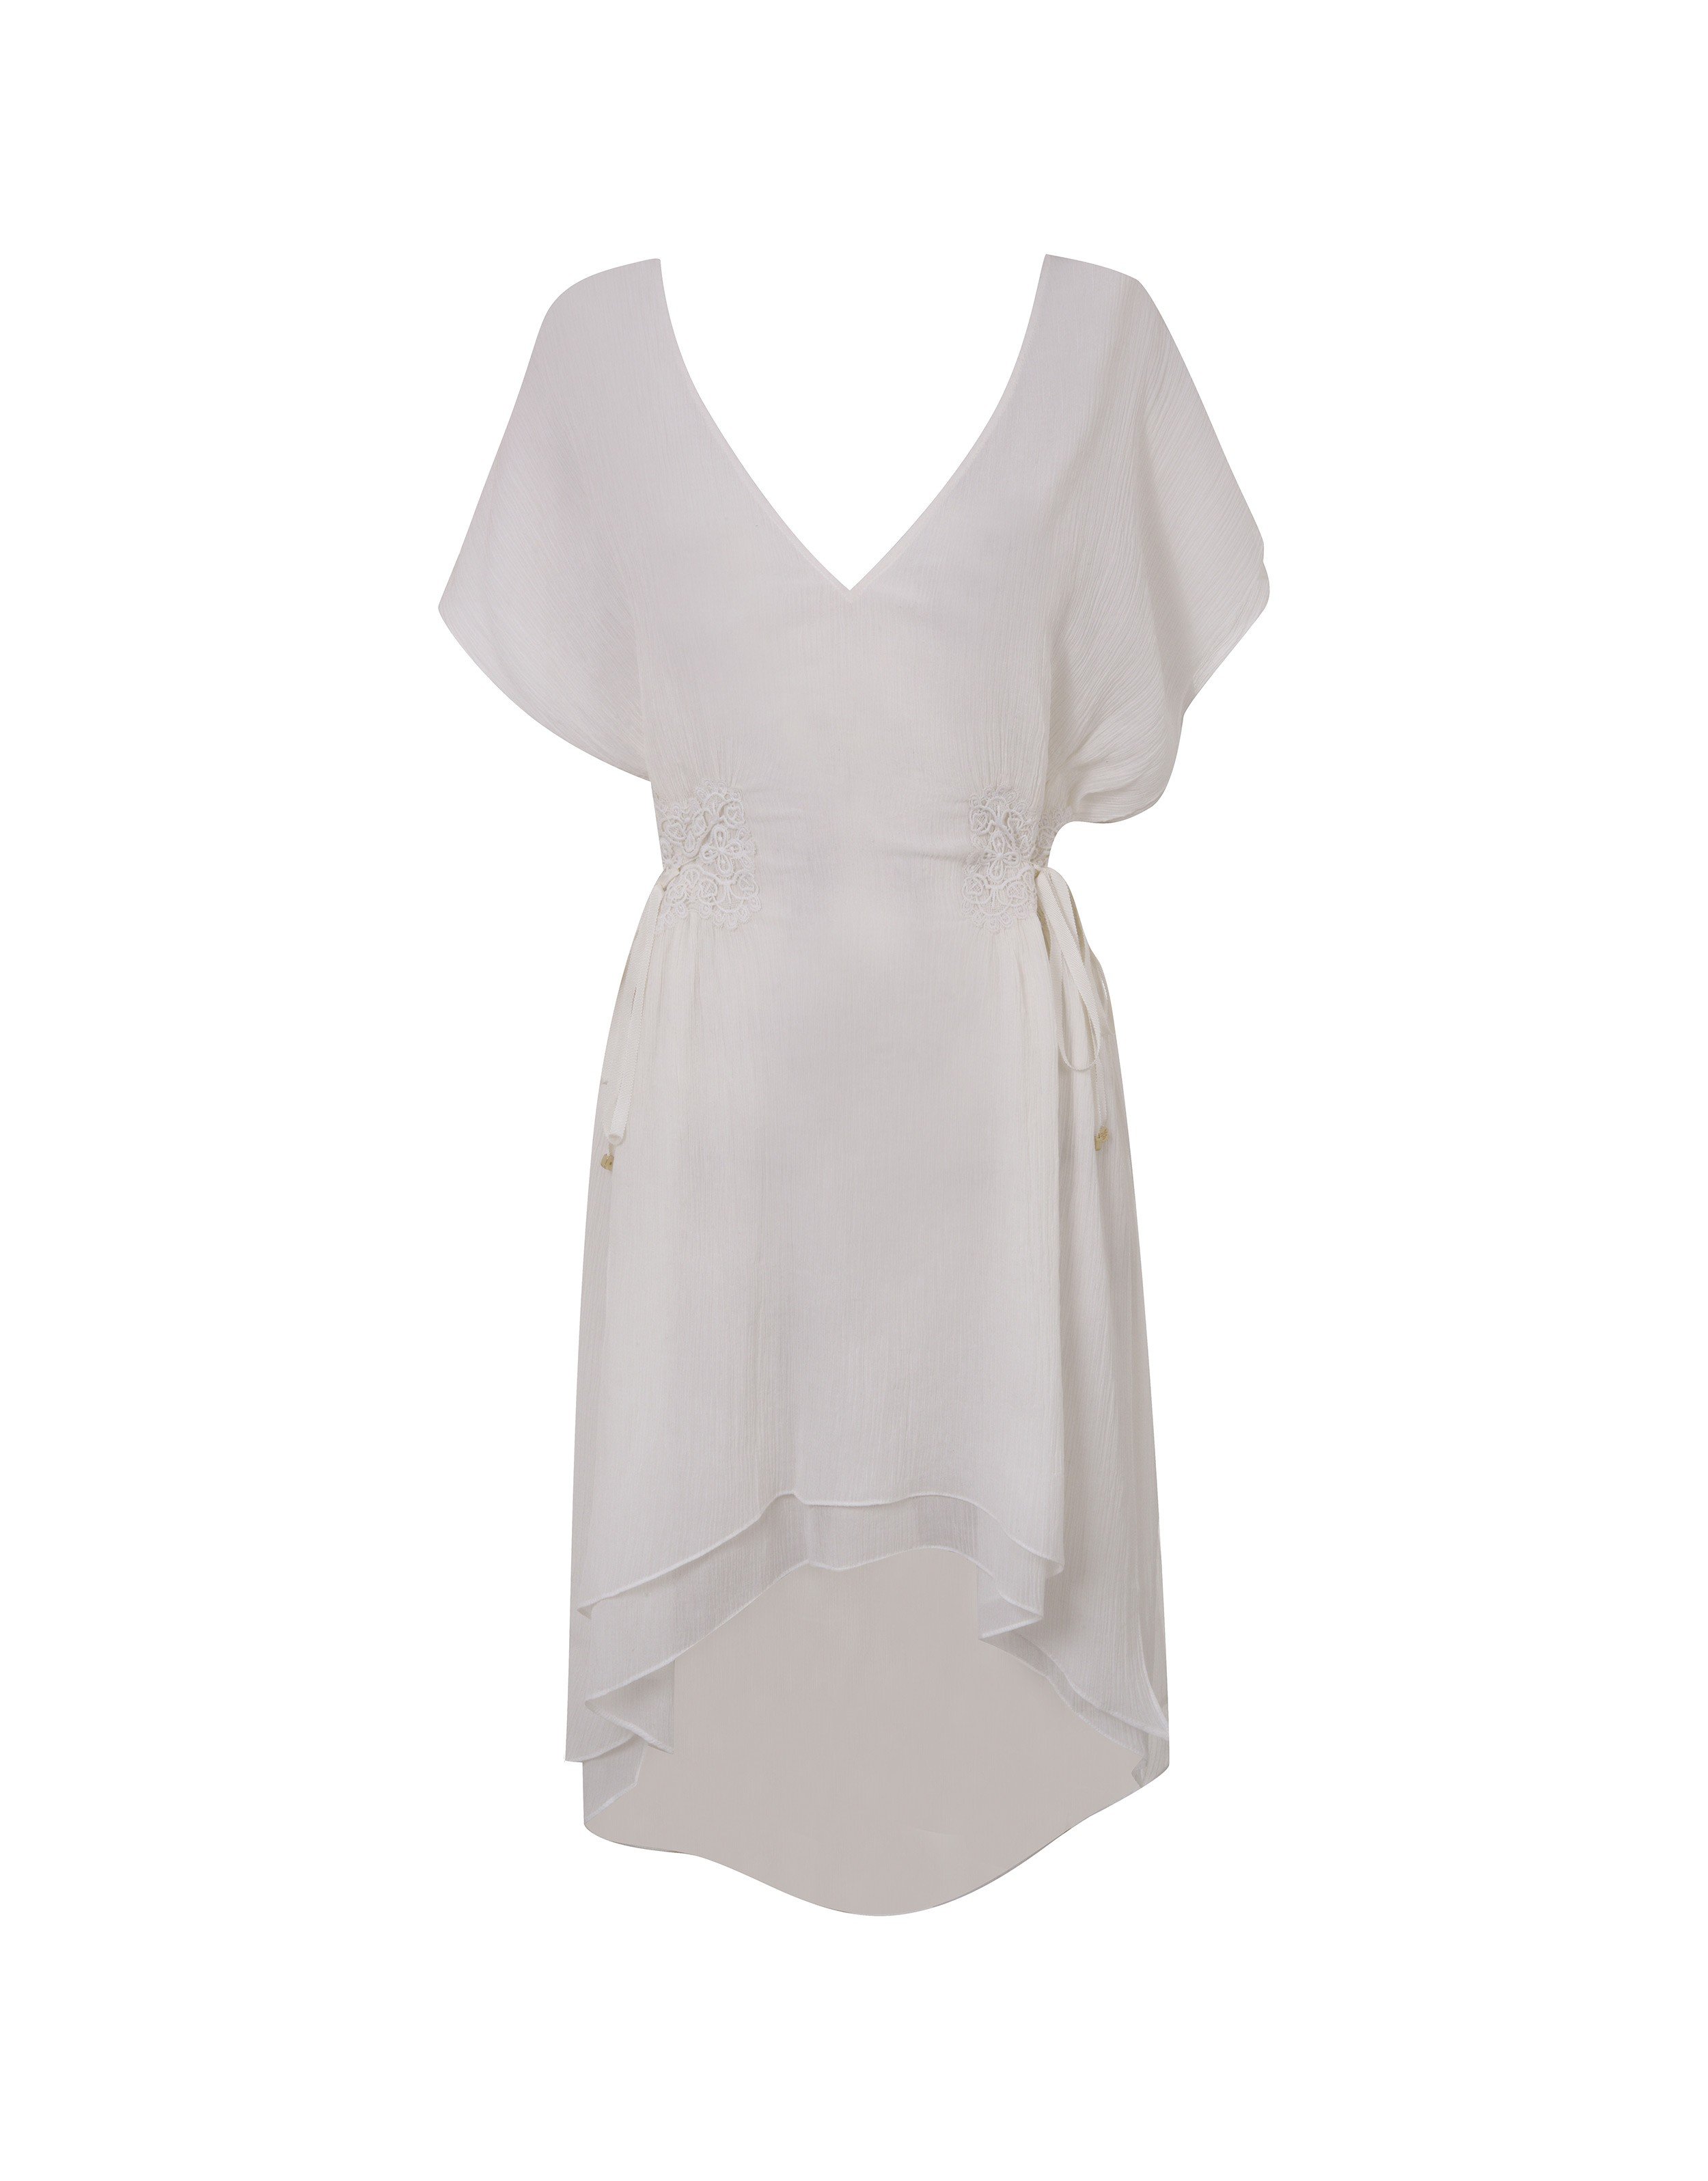 Lowri Kaftan in White | Agent Provocateur Outlet